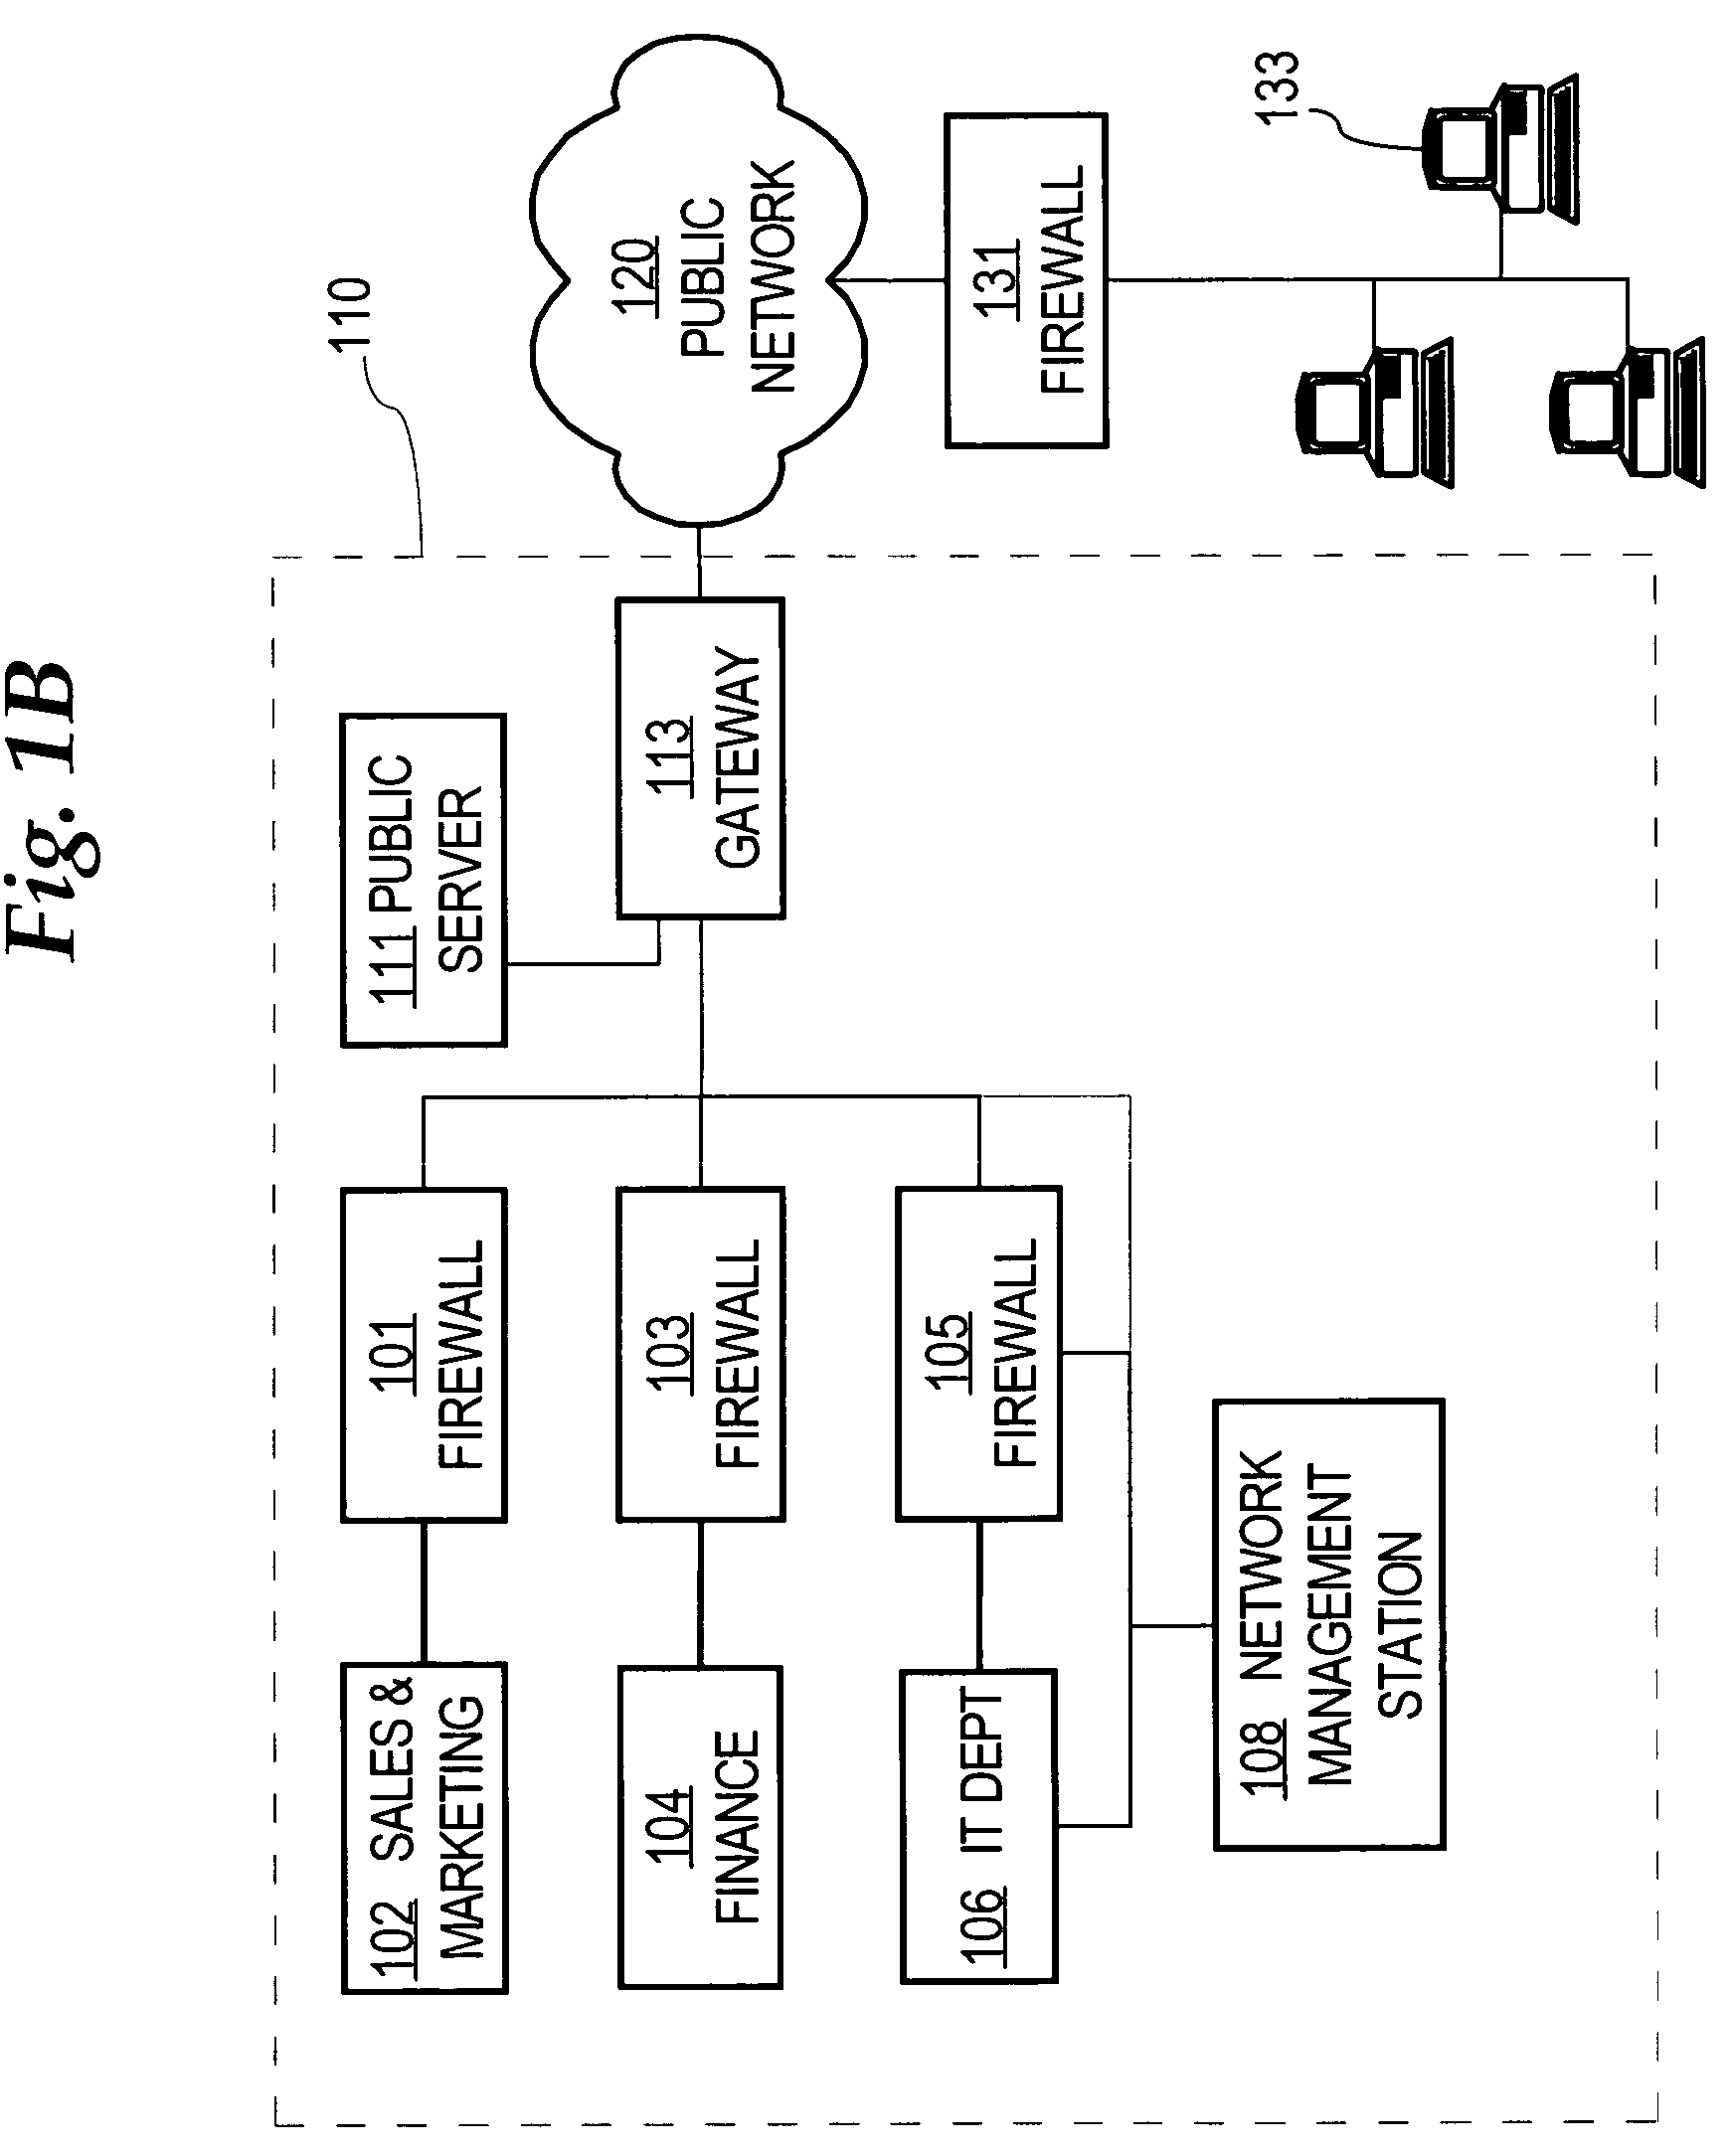 Method and apparatus for controlled access of requests from virtual private network devices to managed information objects using simple network management protocol and multi-topology routing